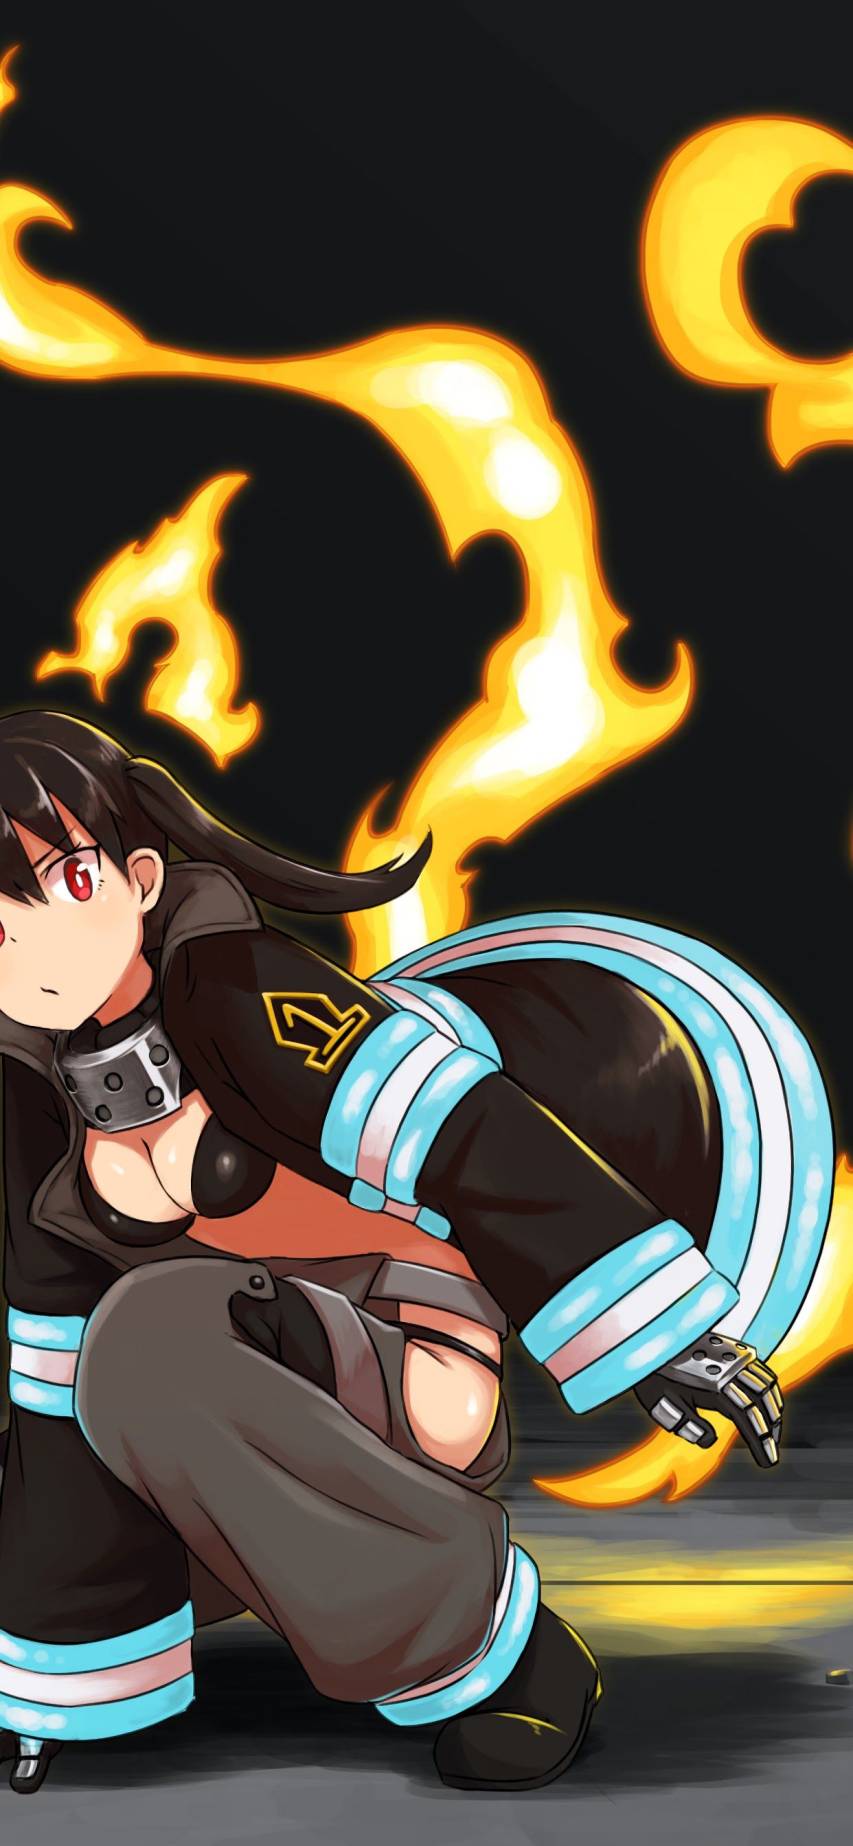 Free Pictures of Fire Force Wallpapers for iPhone